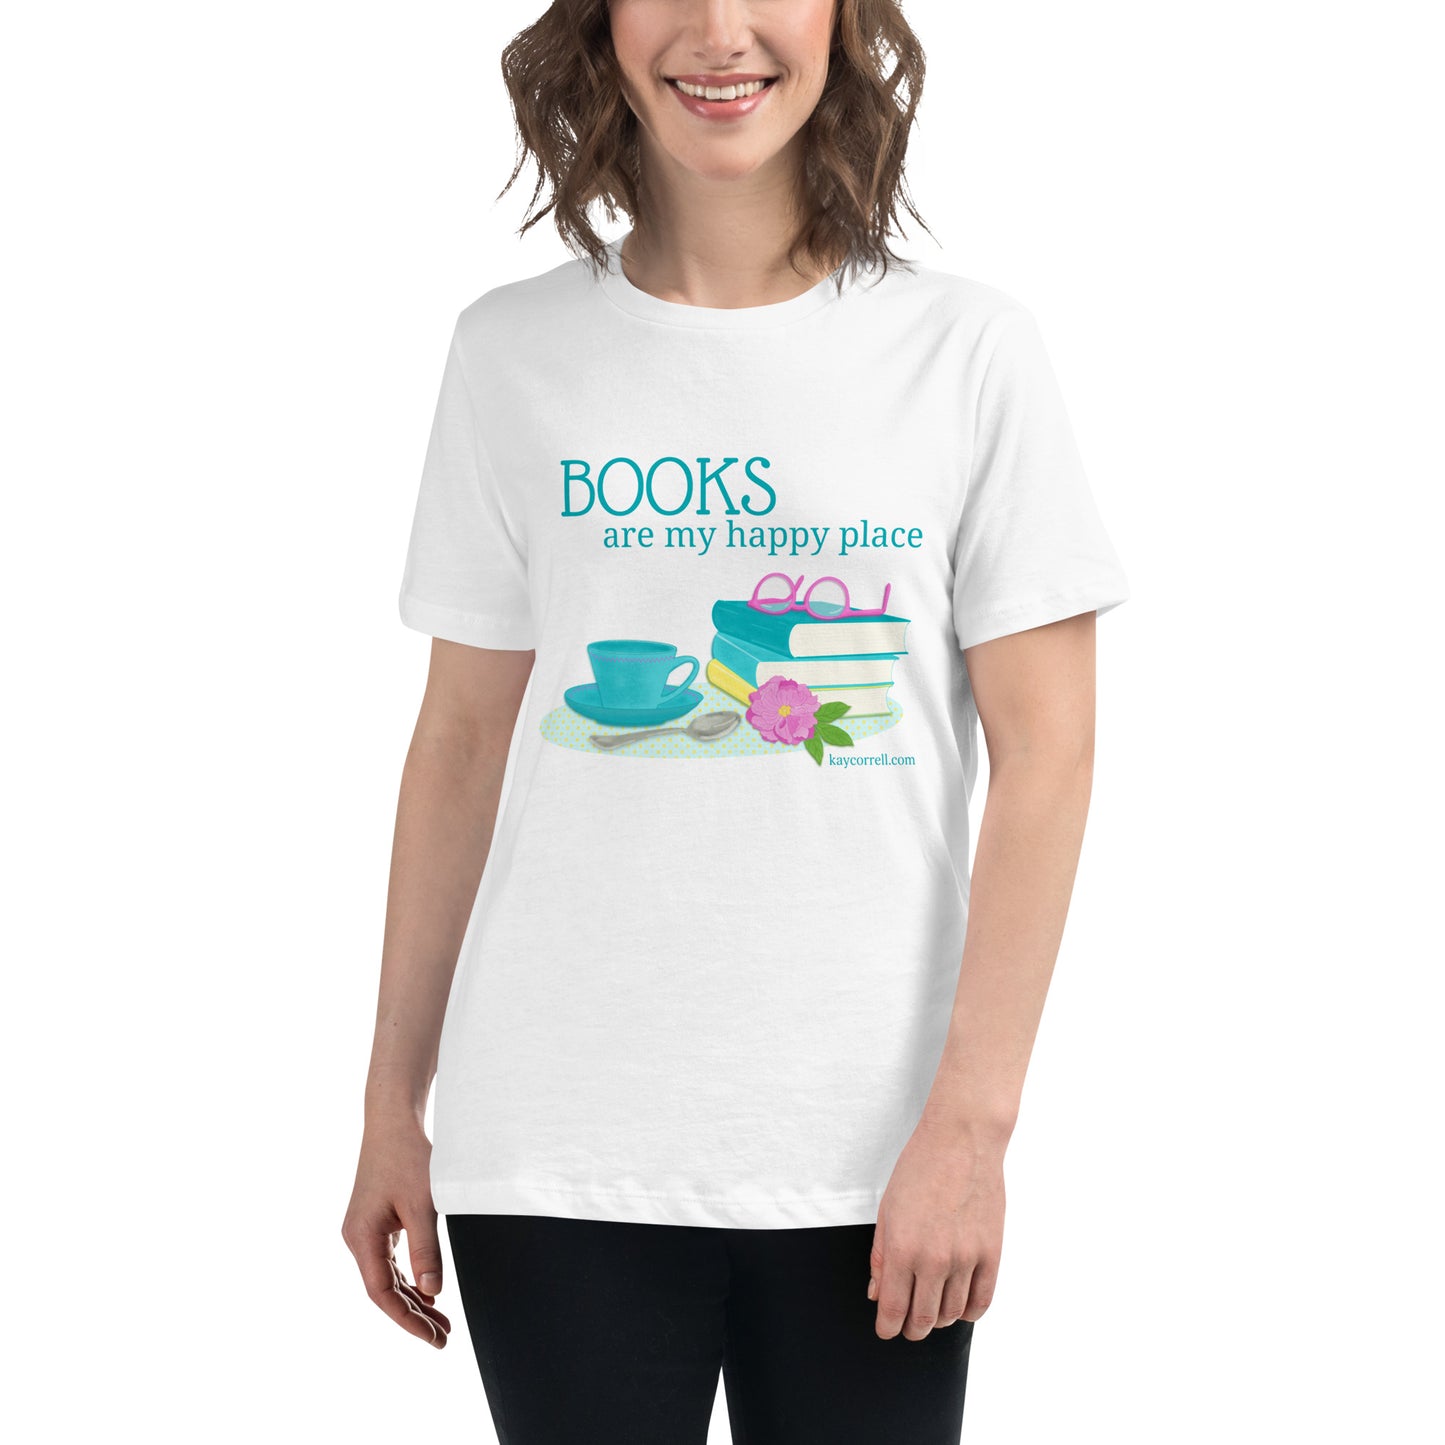 Women's Relaxed T-Shirt - Books are my Happy Place.